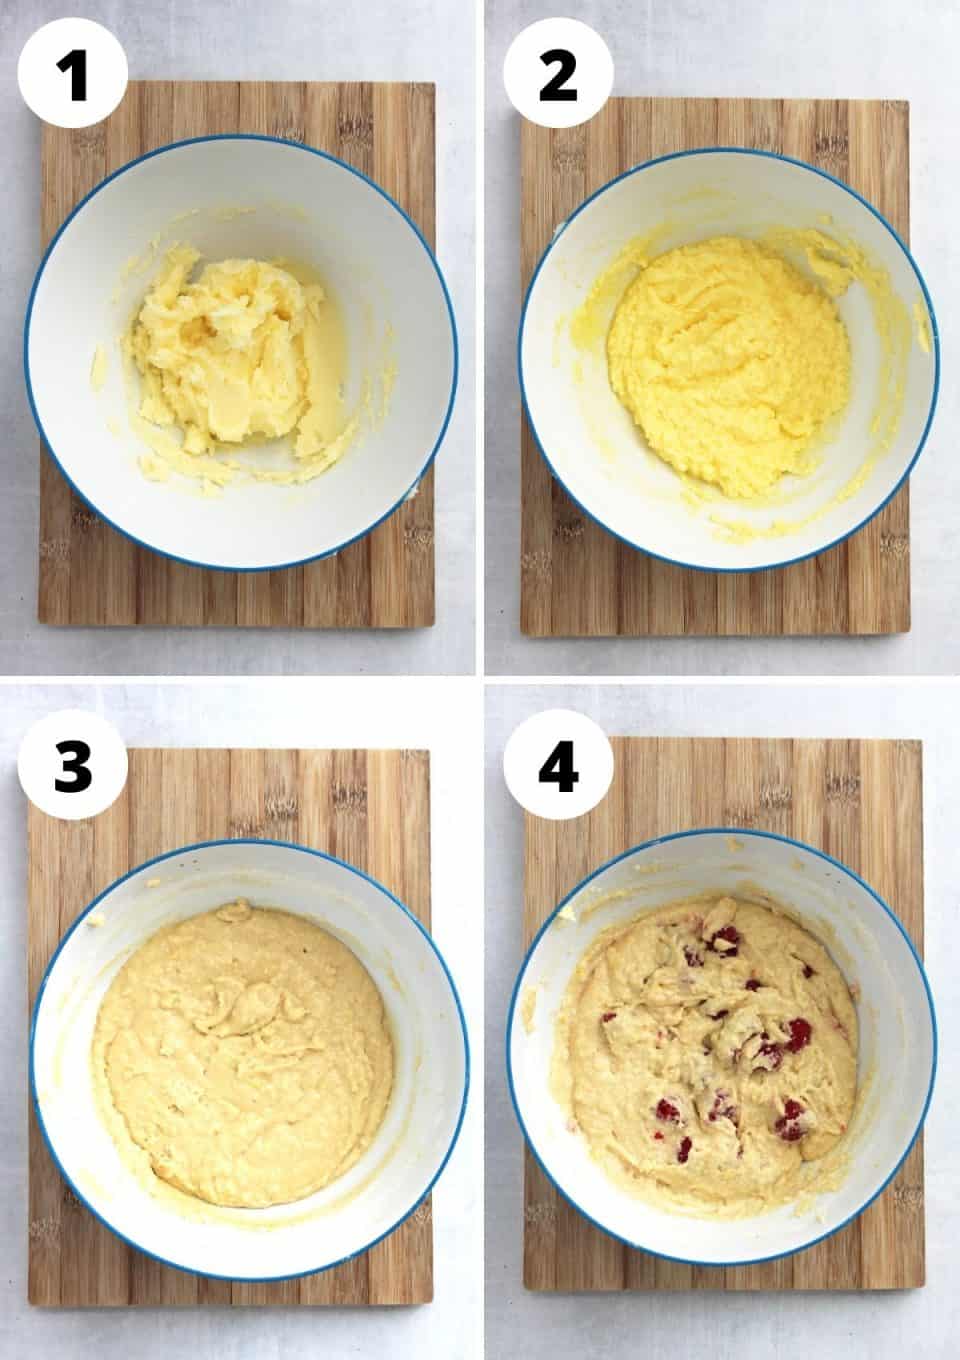 Four step by step photos to show how to make the pound cake batter.